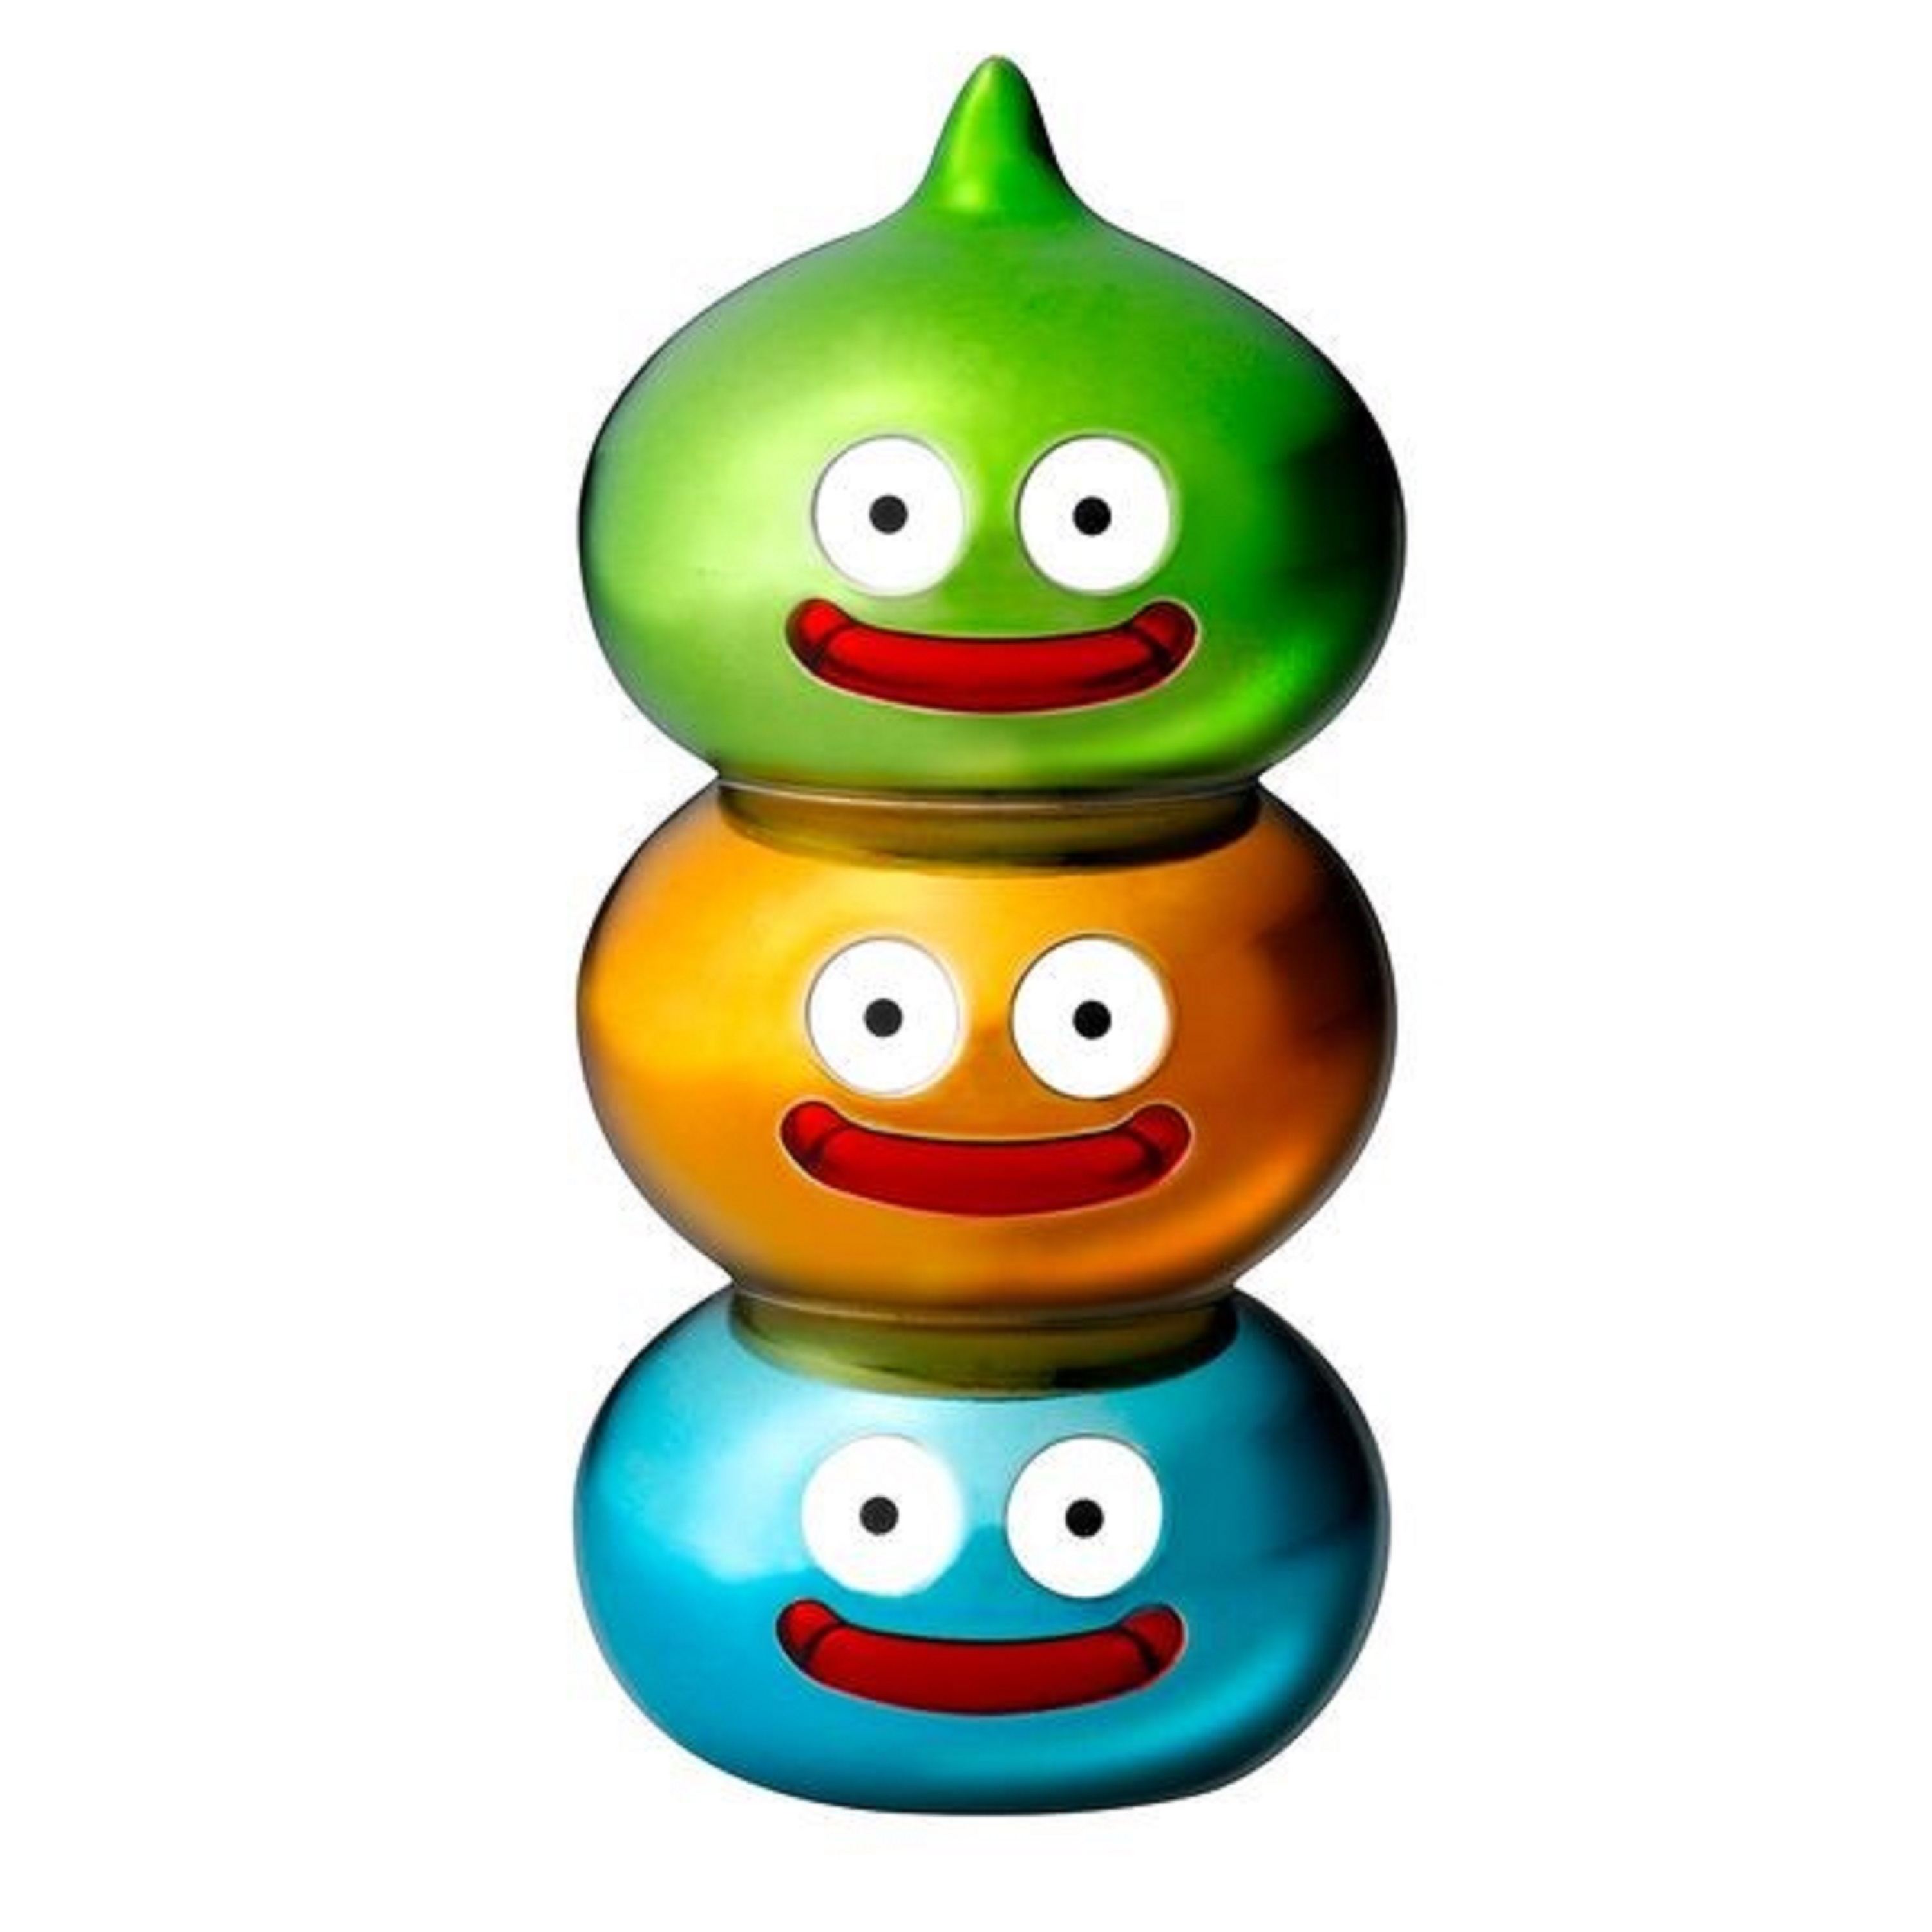 Dragon Quest Metallic Monsters Gallery: Slime Tower (Re-run) Square Enix